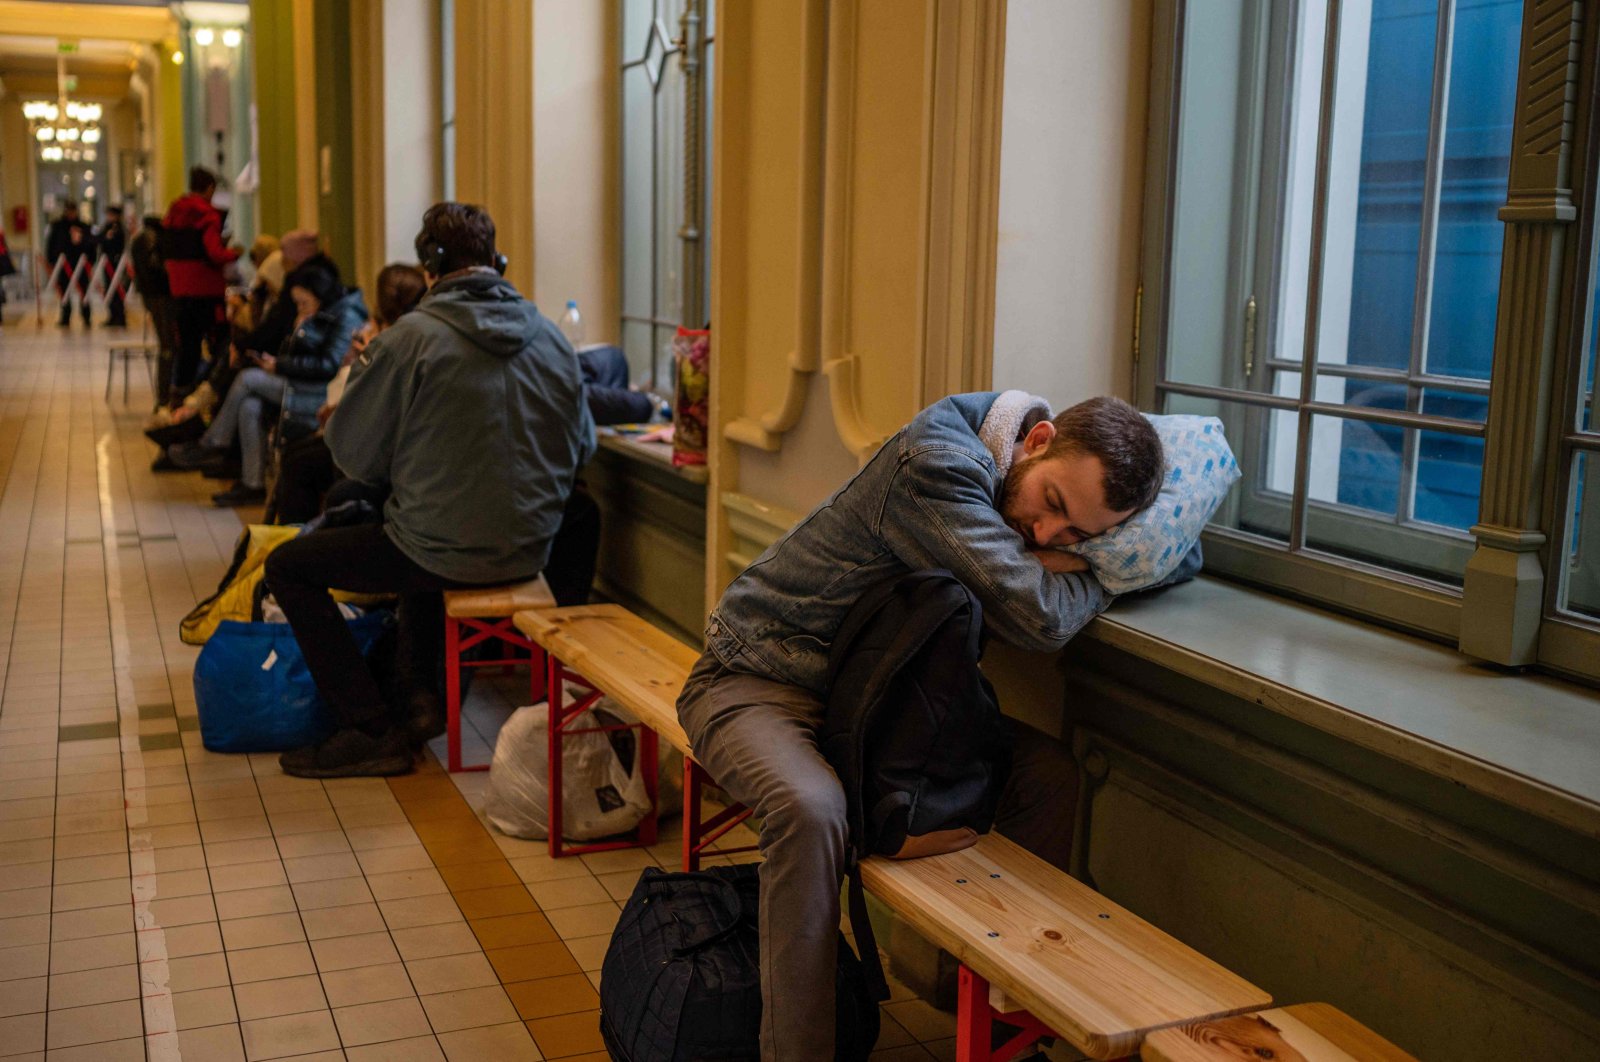 A refugee from Ukraine sleeps in the hall of the main railway station in Przemysl, southeastern Poland, near the Polish-Ukrainian border on March 31, 2022. (AFP Photo)